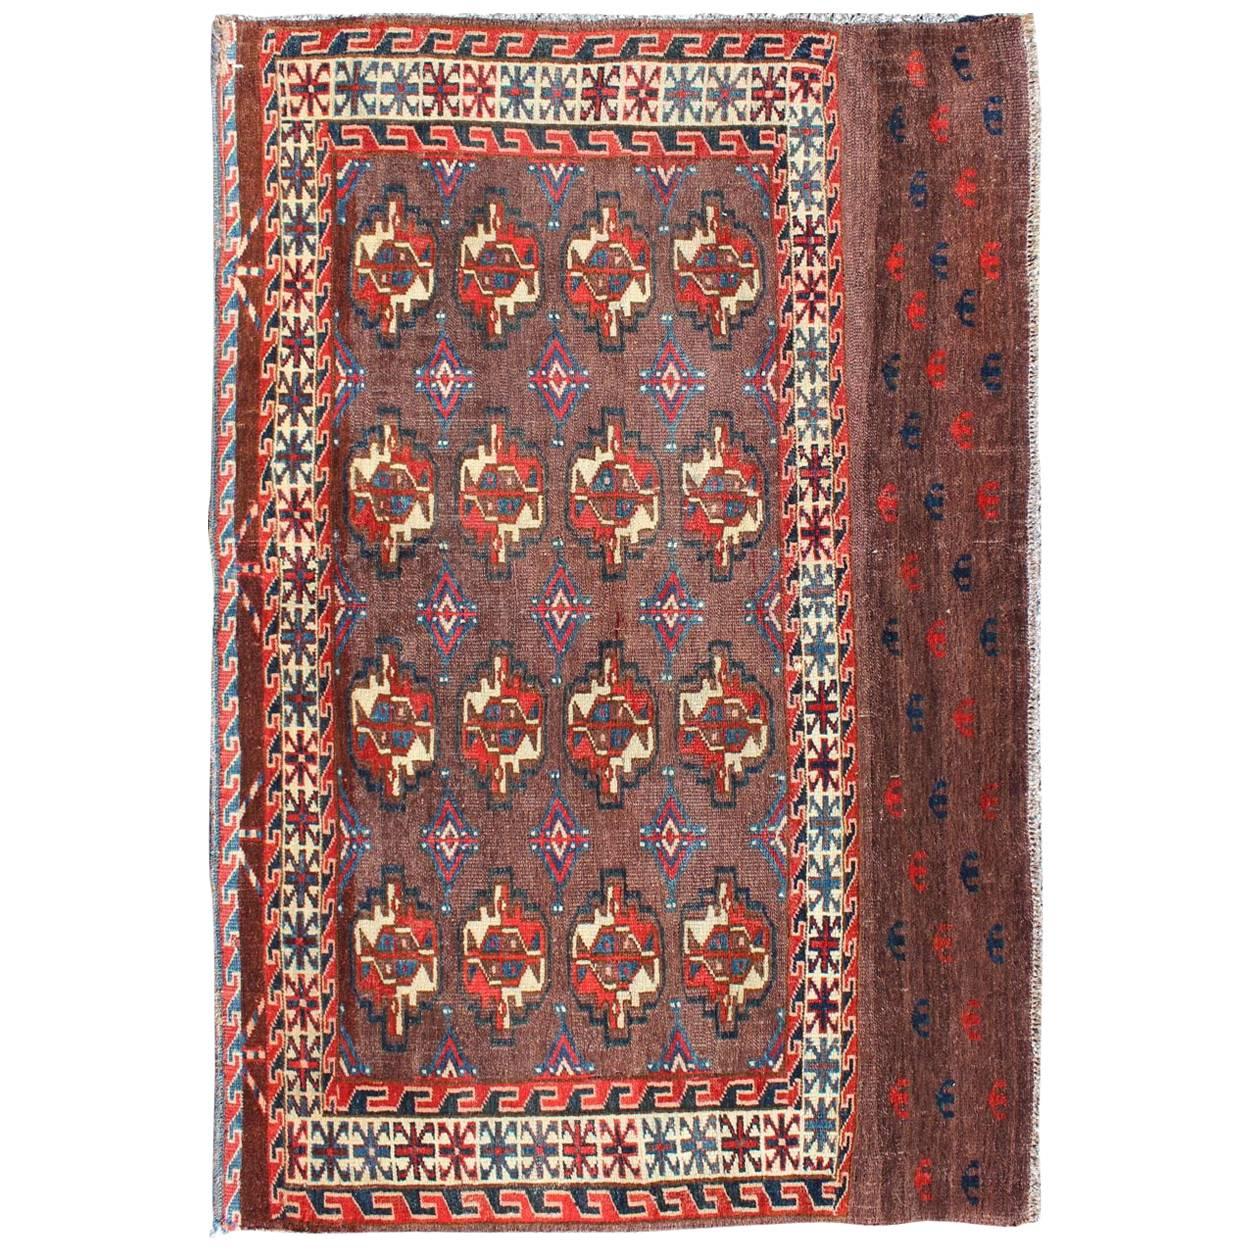 19th Century Antique Tekke Rug with Brown Field and Tribal Motifs in Red